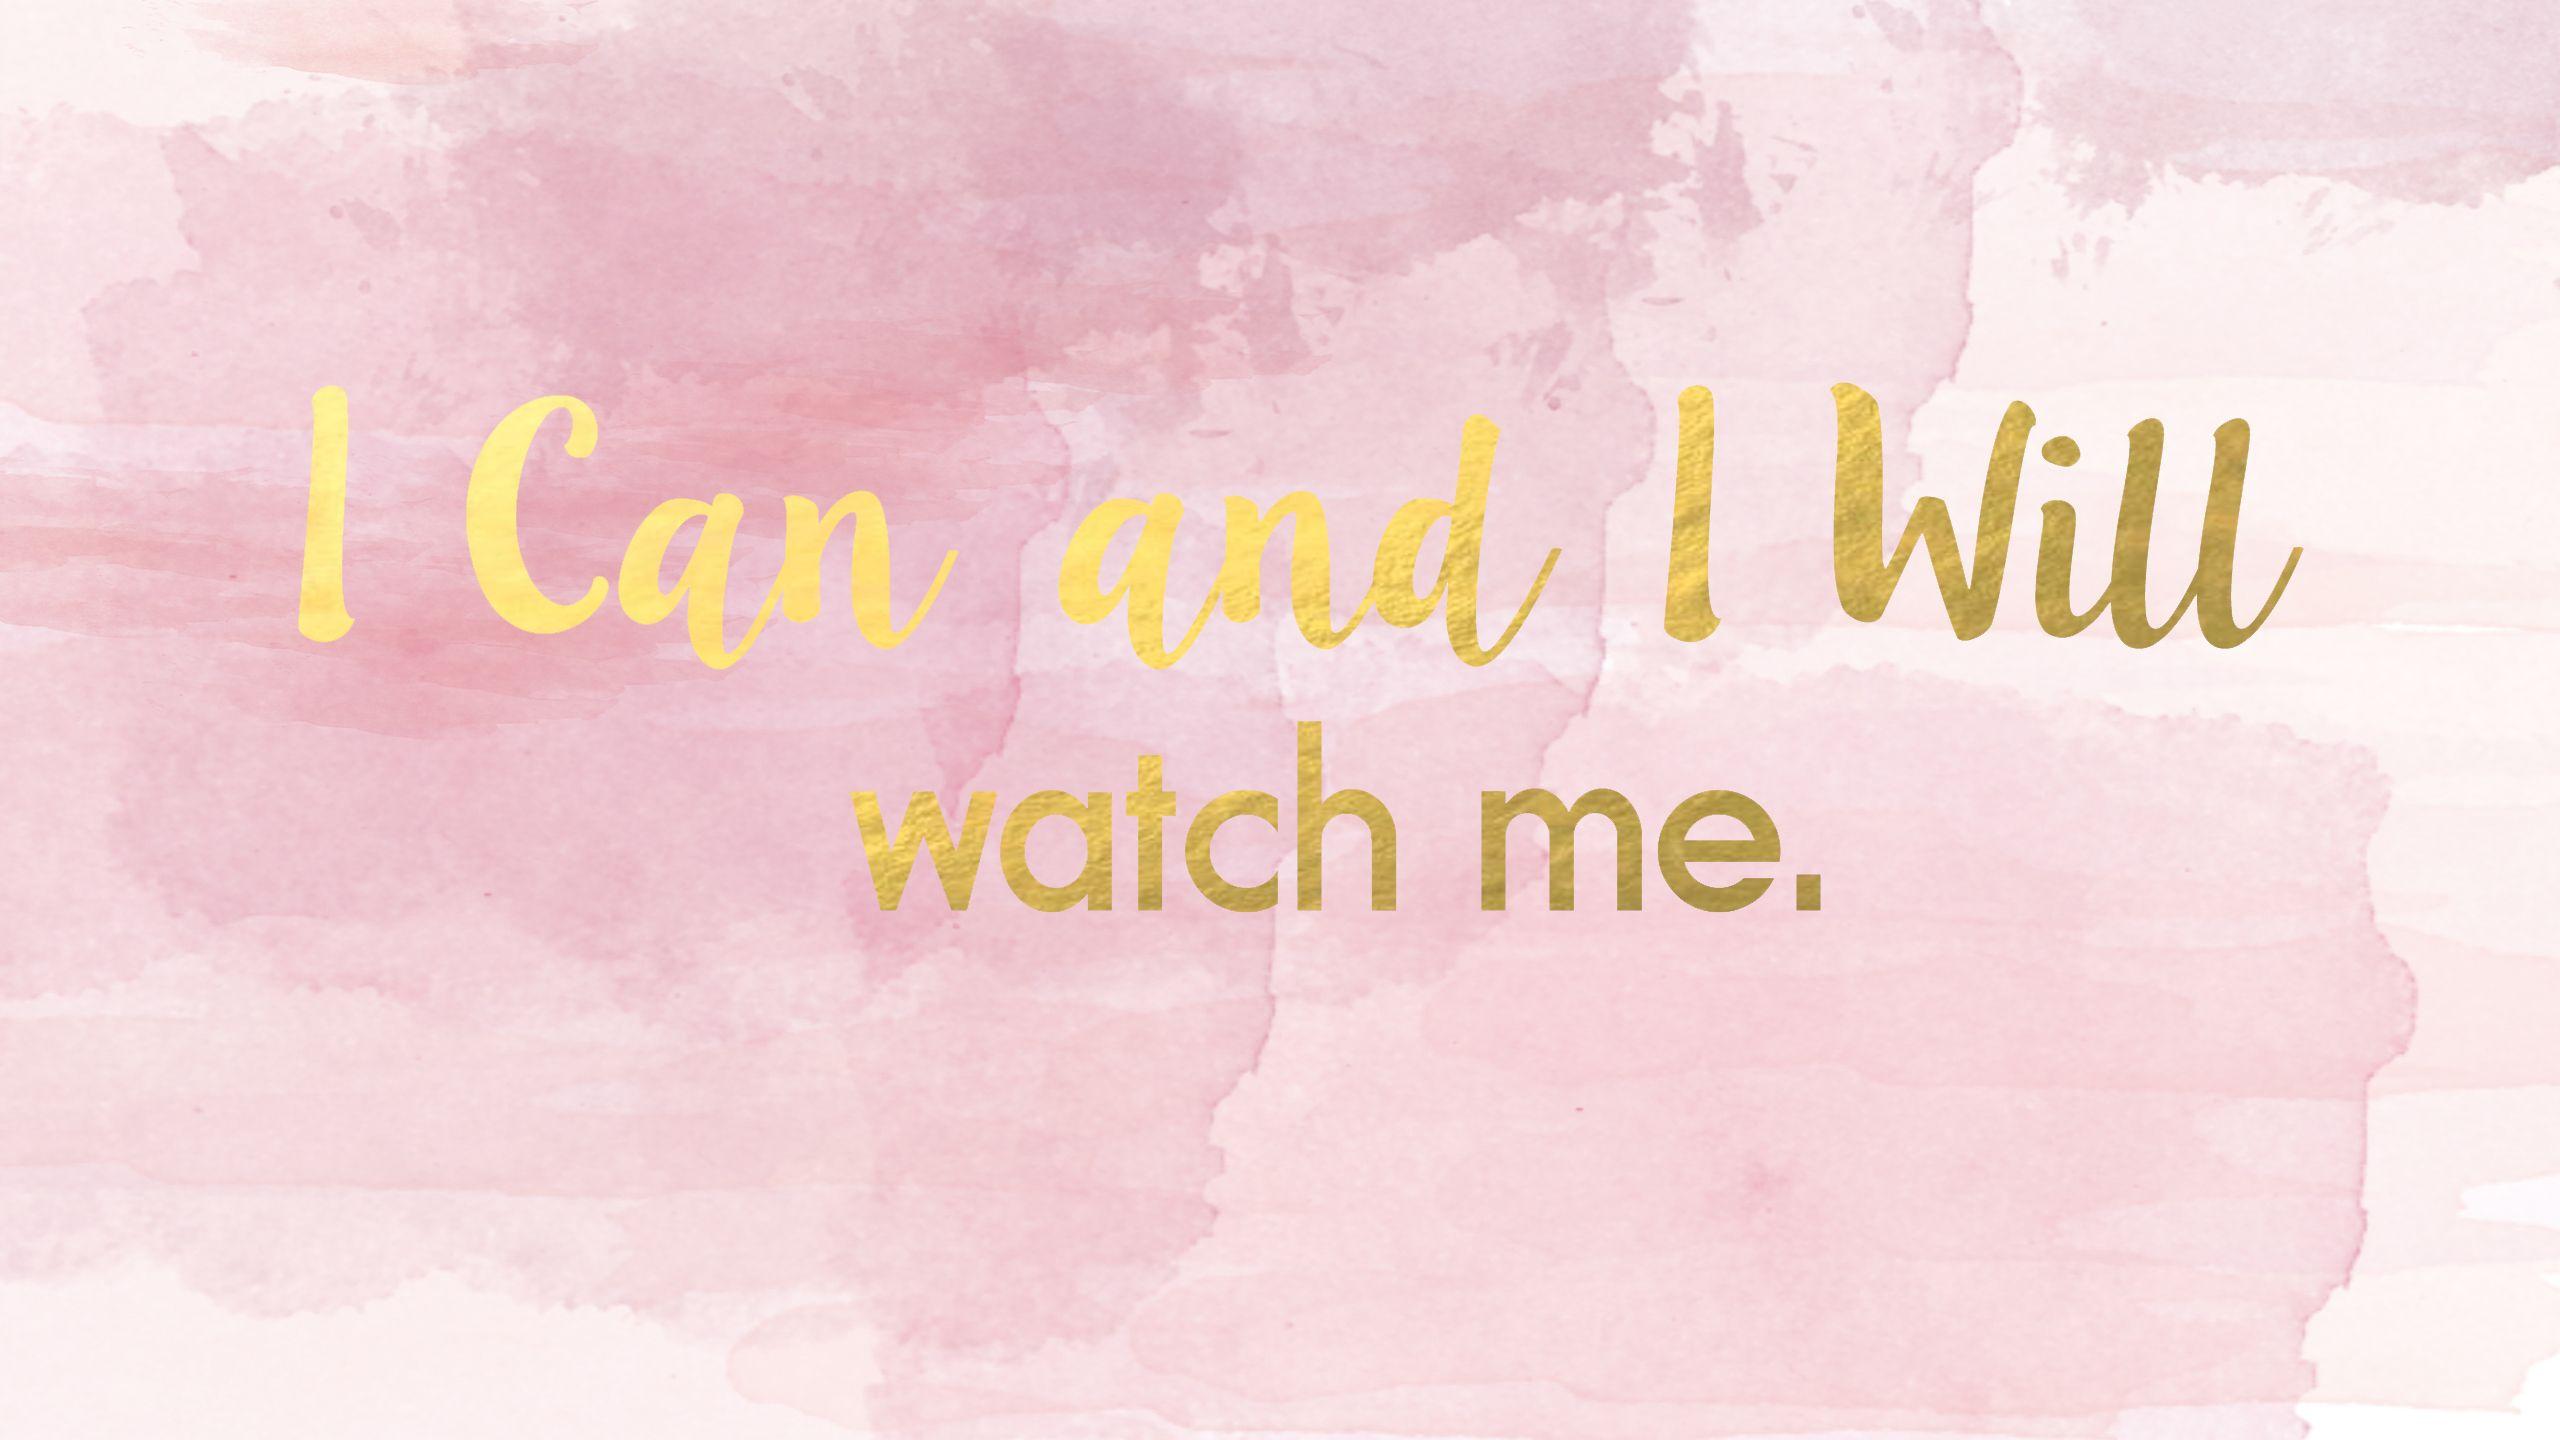 I Can And I Will desktop wallpaper pink pastel and gold. Mac